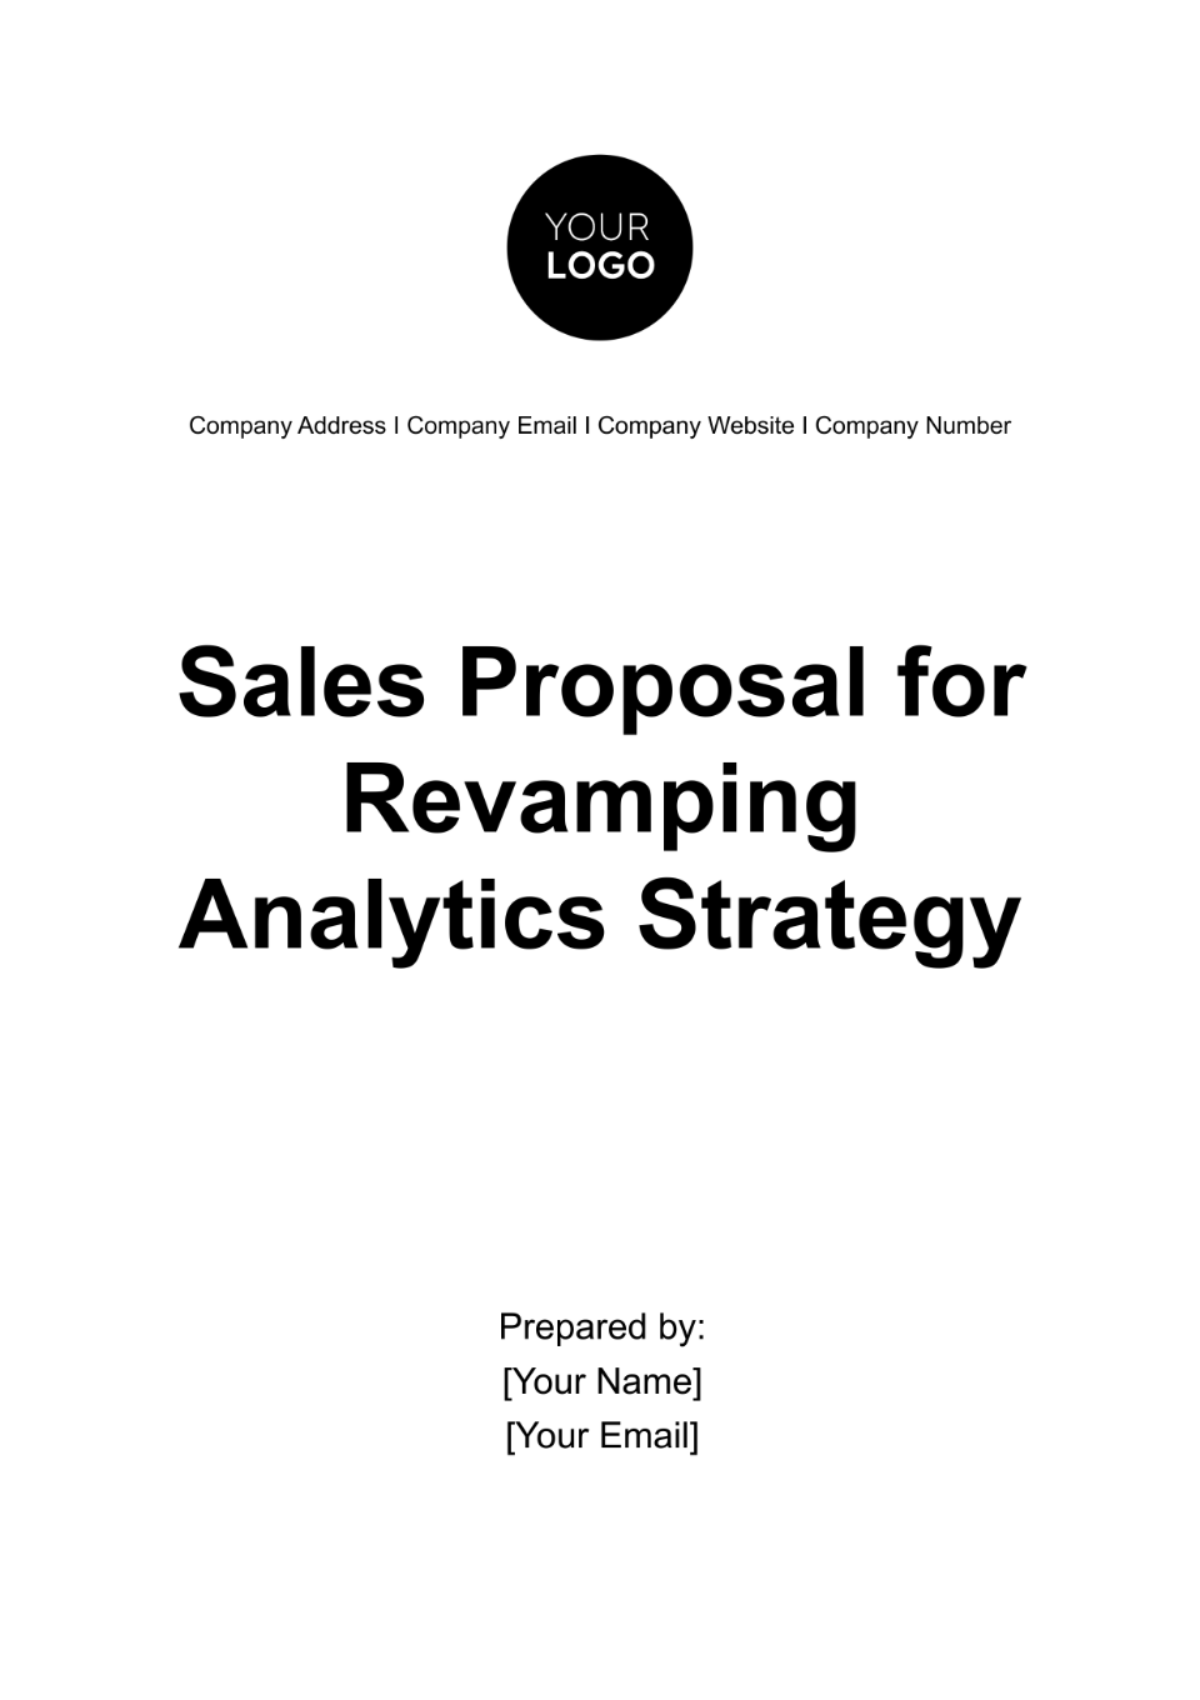 Free Sales Proposal for Revamping Analytics Strategy Template